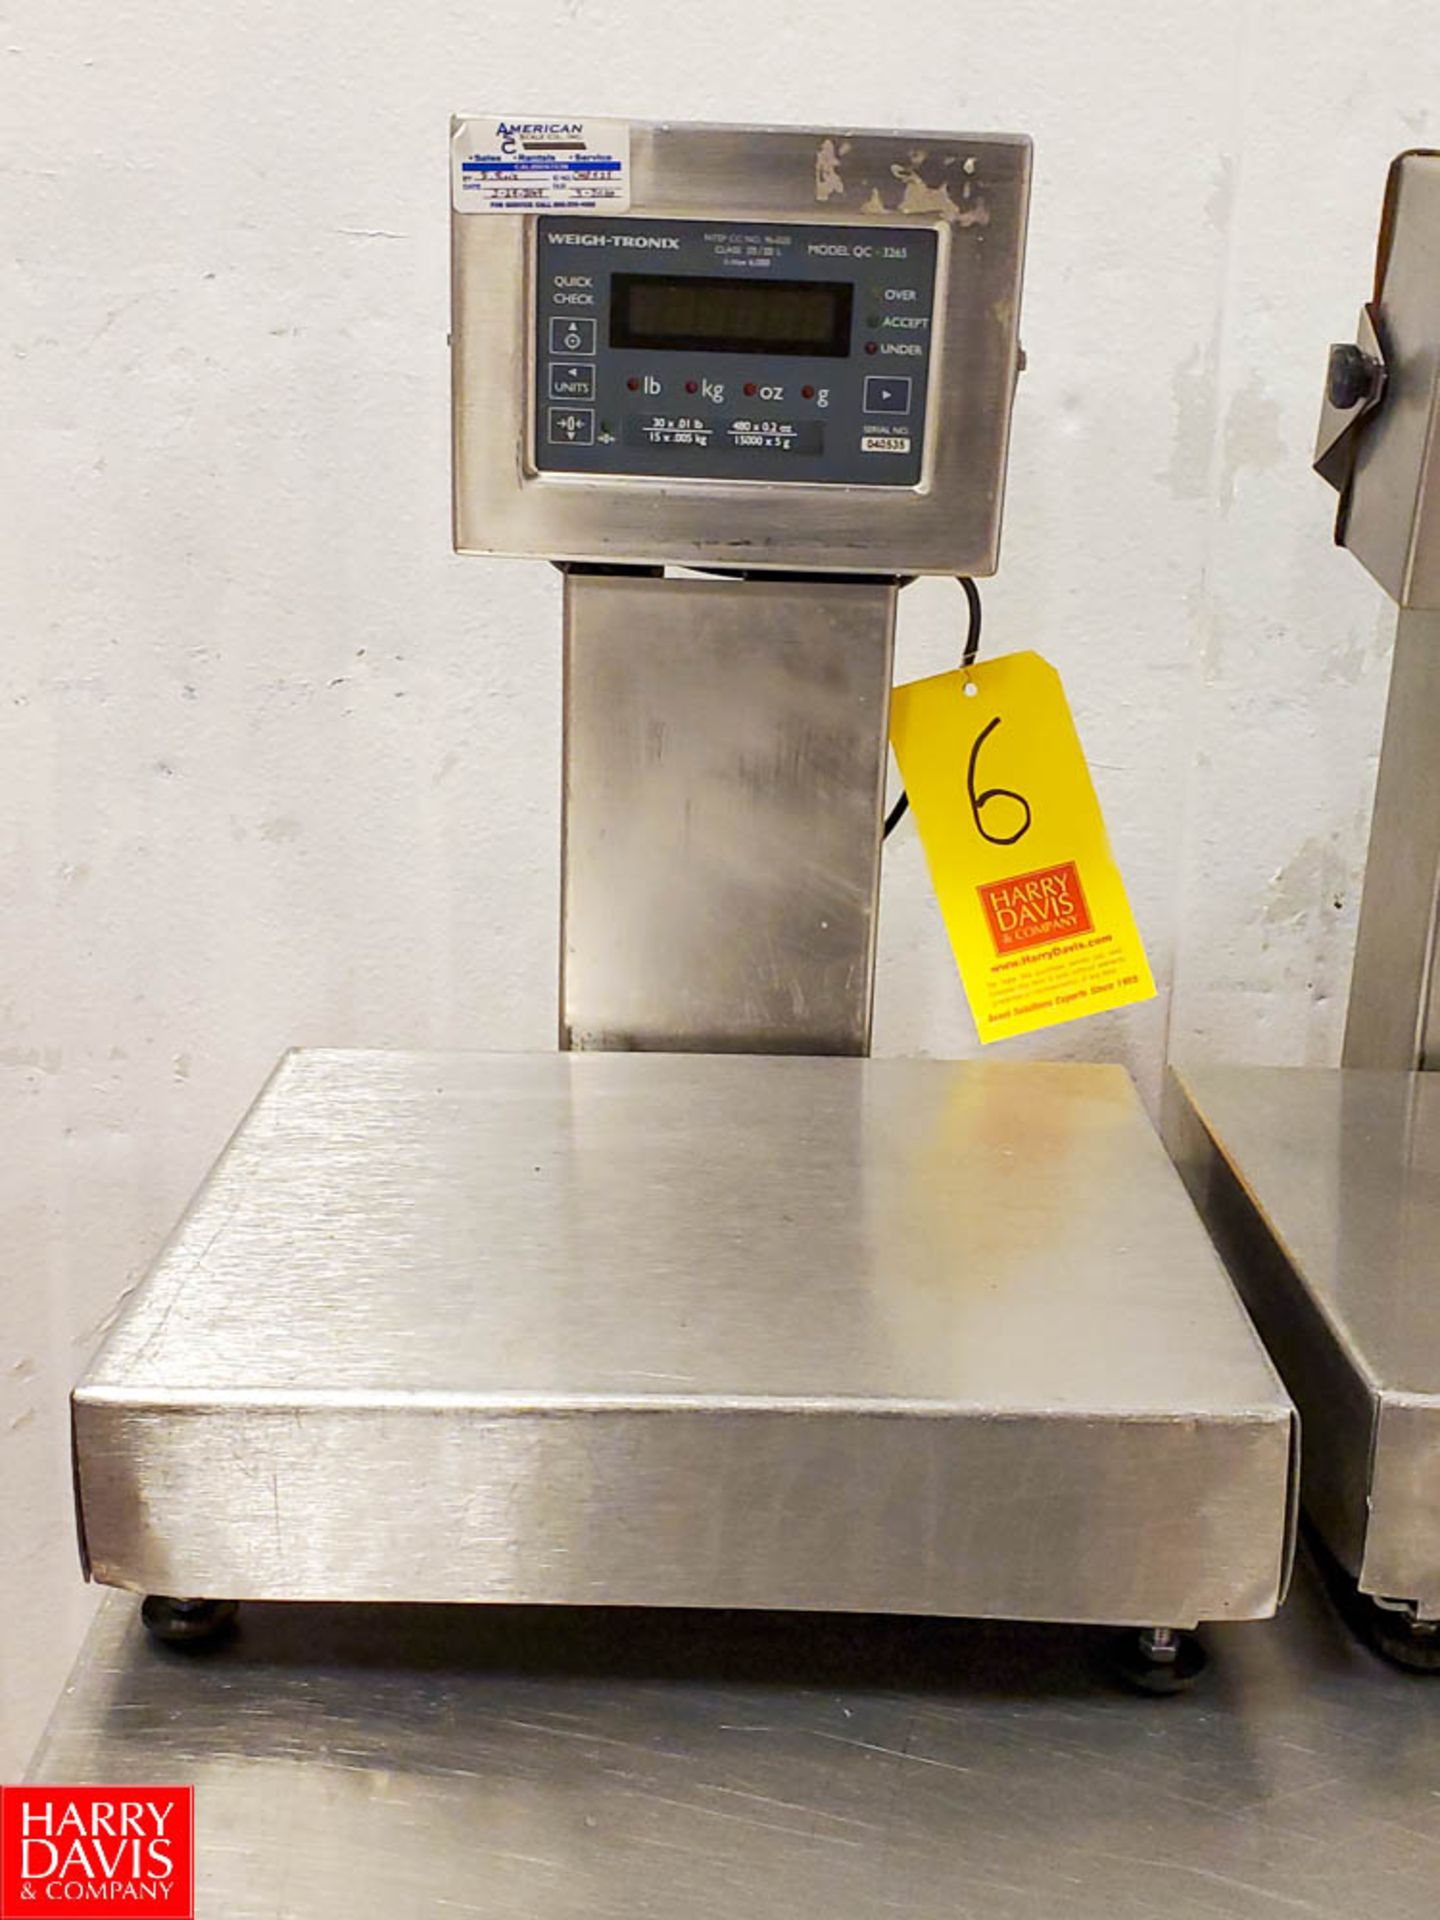 Avery Weigh-Tronix Model QC3265 Checkweigh S/S Digital Scale Rigging Fee: $ 30